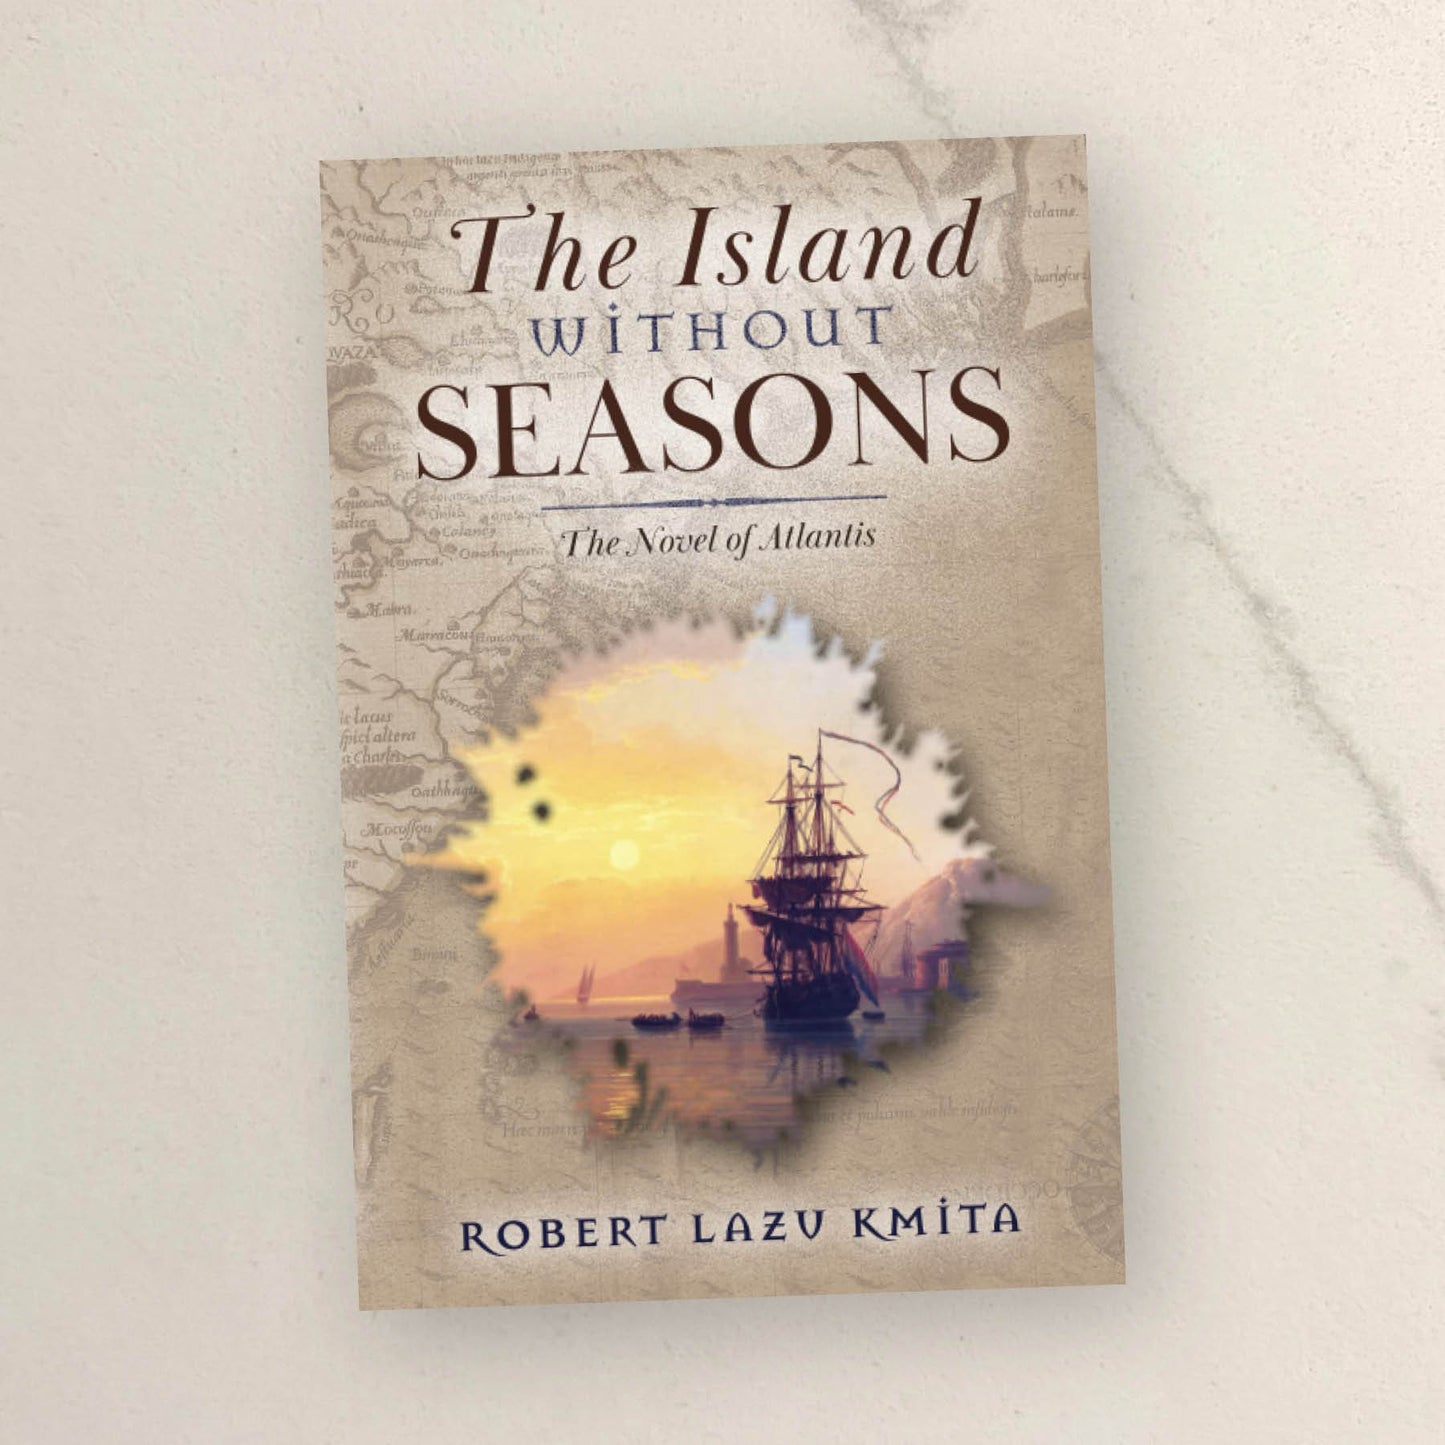 The Island Without Seasons